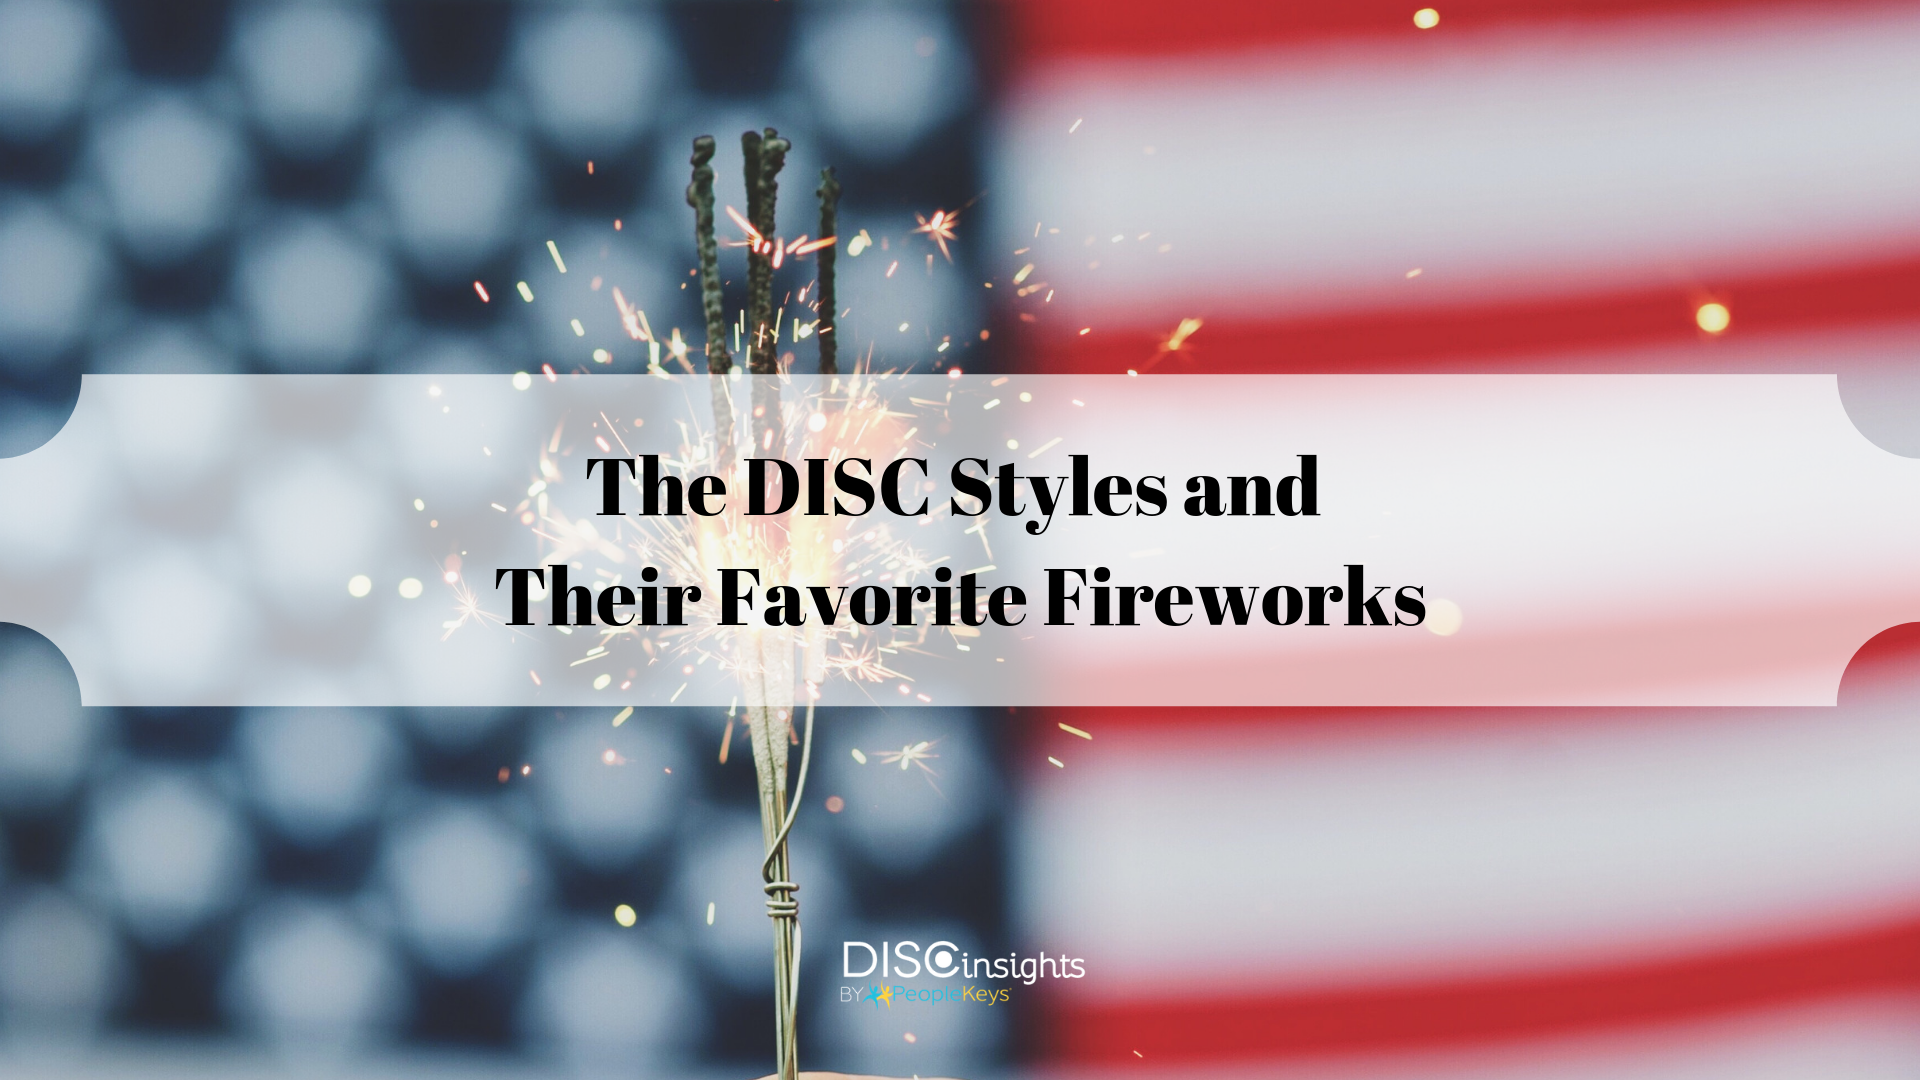 The DISC Styles and Their Favorite Fireworks